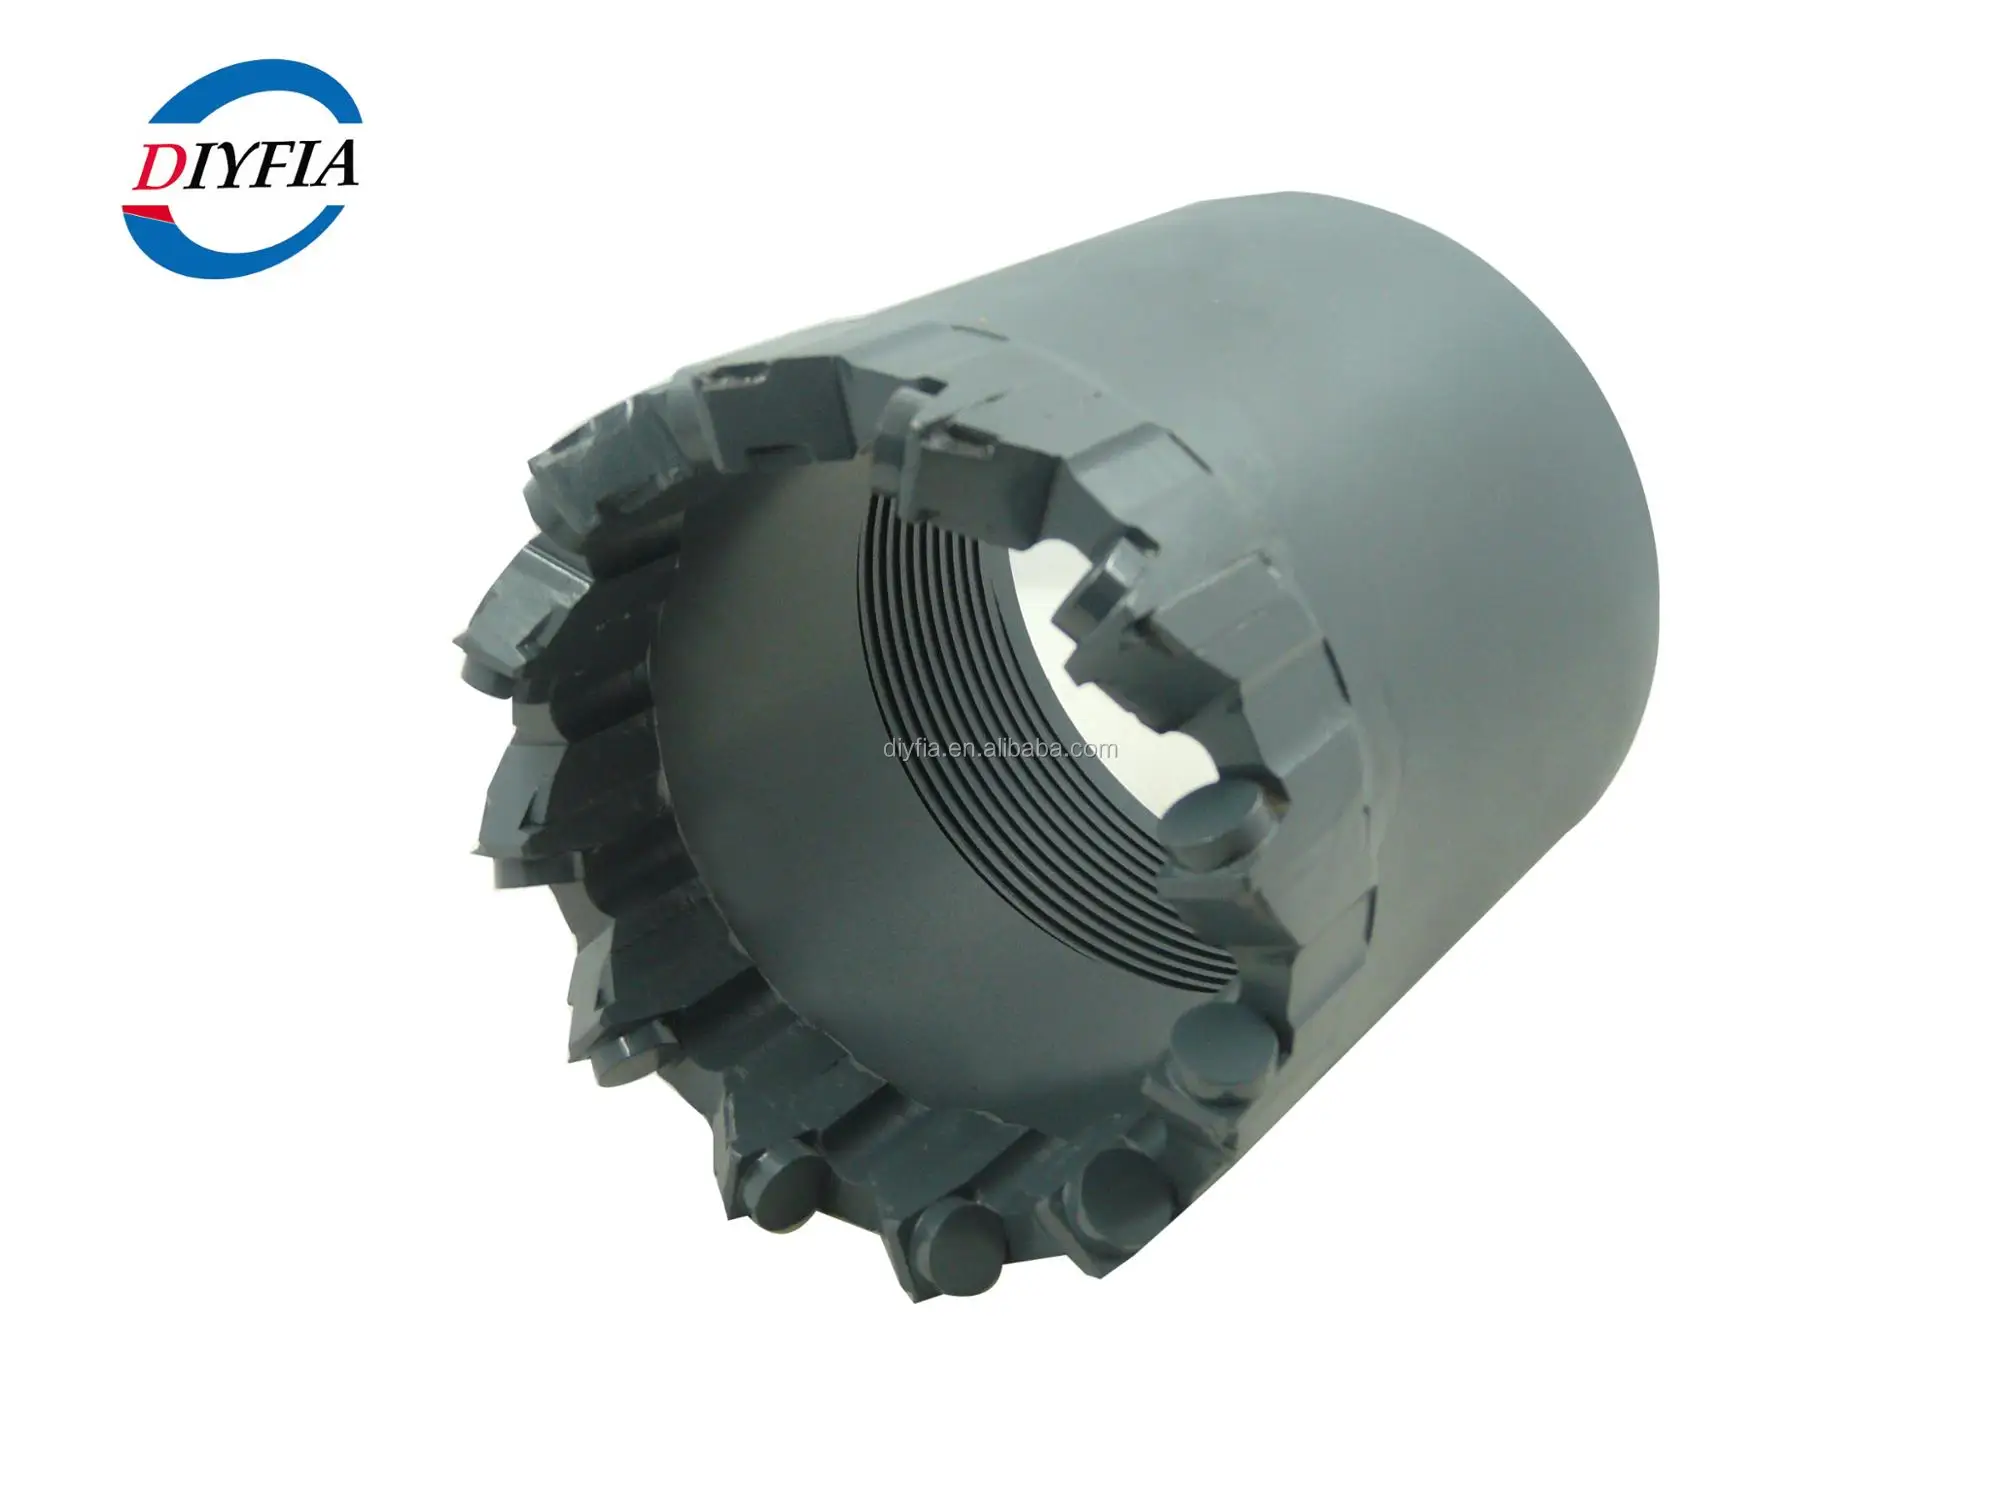 132mm collect core by PDC core drill bit